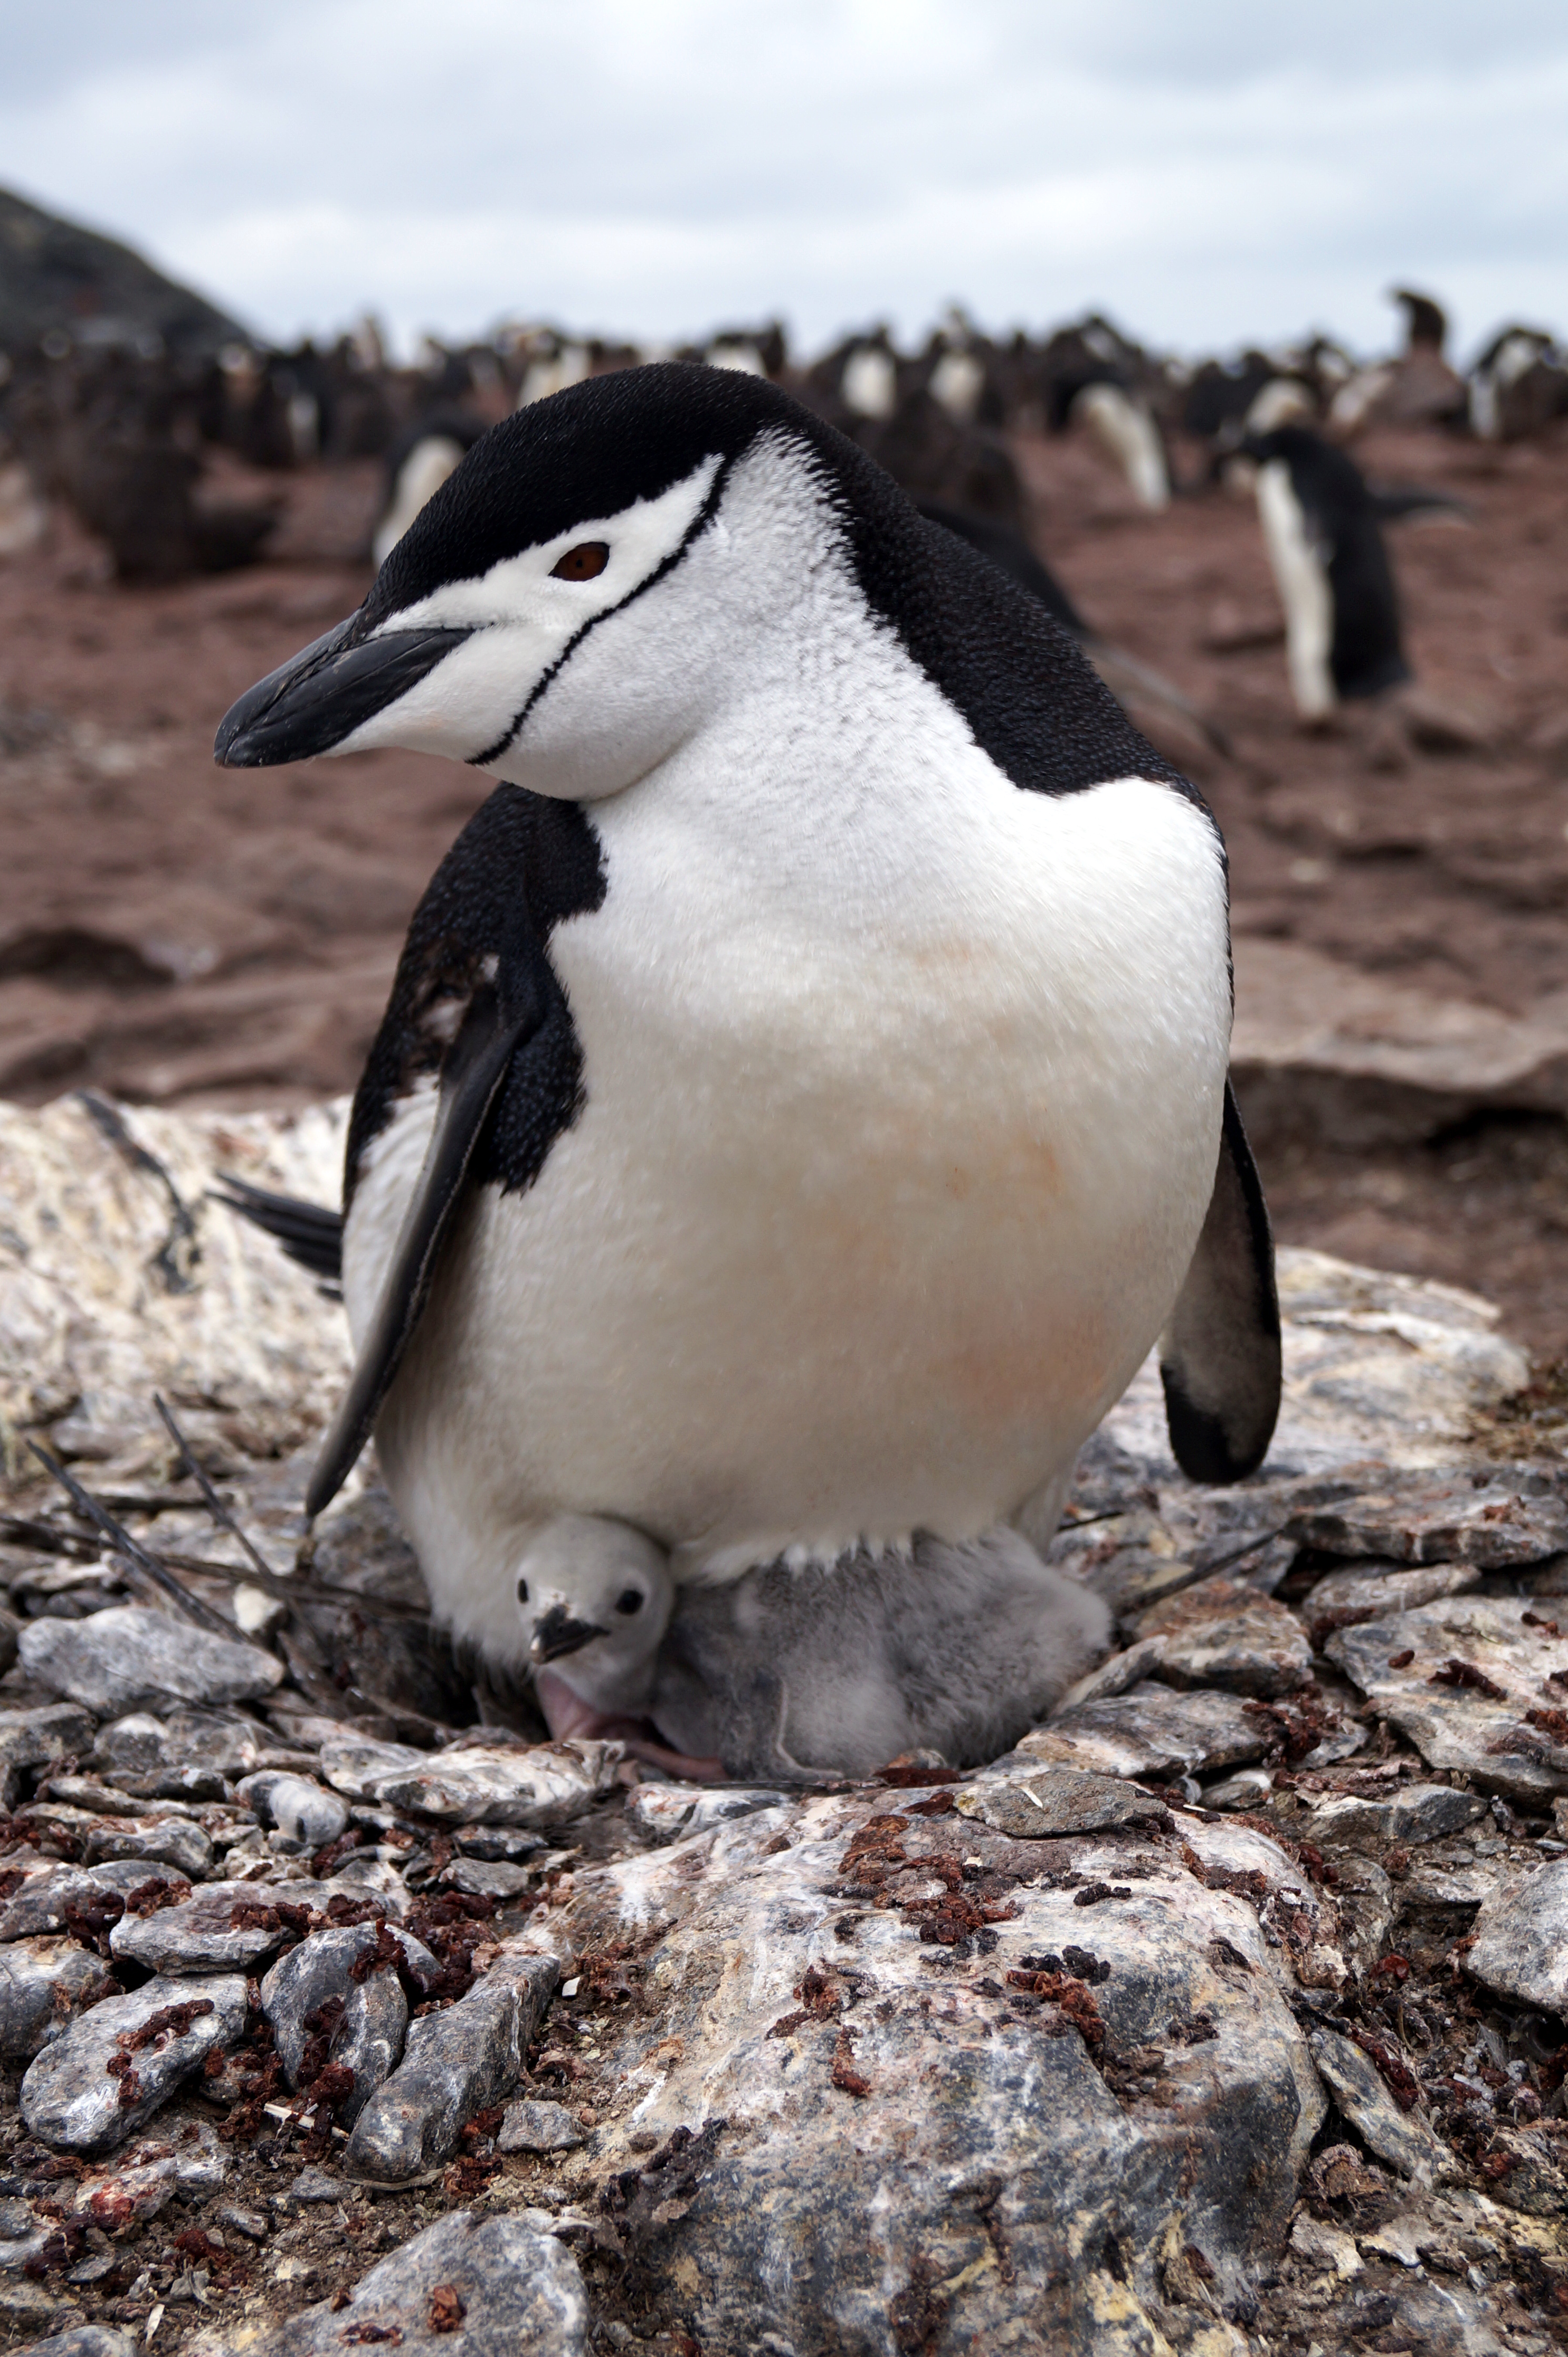 An adult penguin and chick sit on a nest